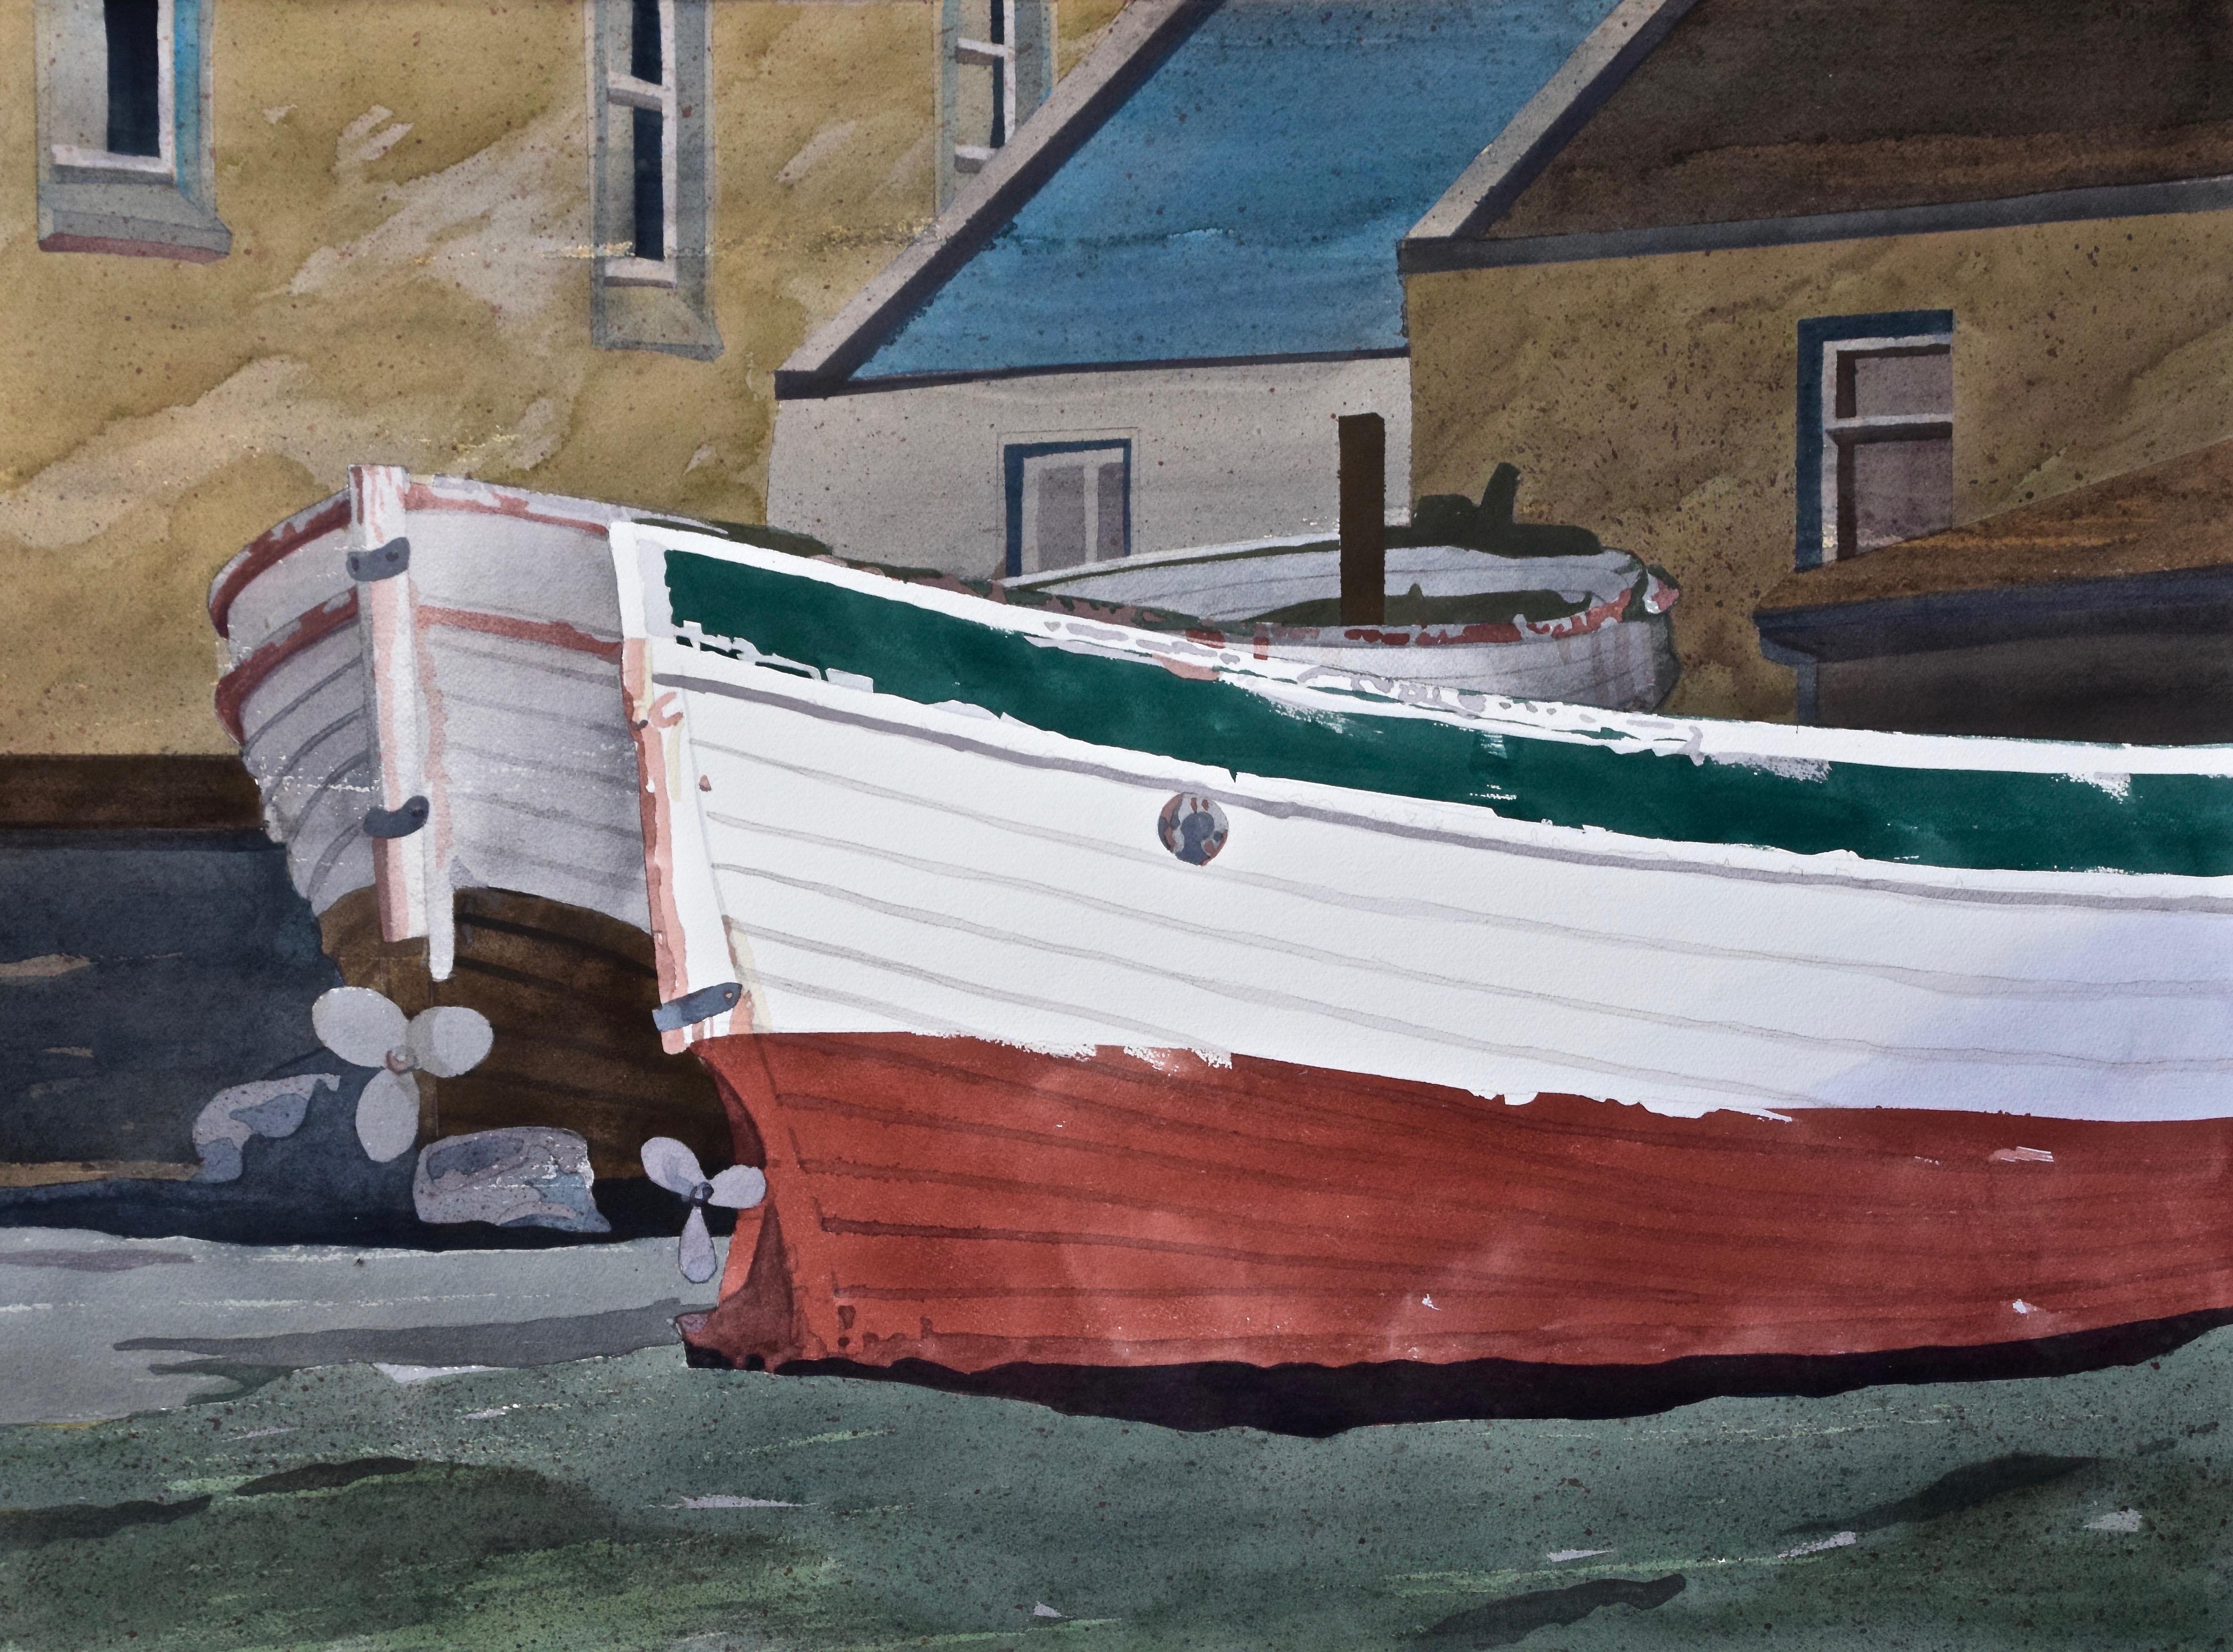 From the artist: Old fishing boats have always fascinated me. Those on the verge of falling apart, and sinking into the sea seem to call me, and I cannot pass one by without shooting a photograph as inspiration for a future painting. I seek to